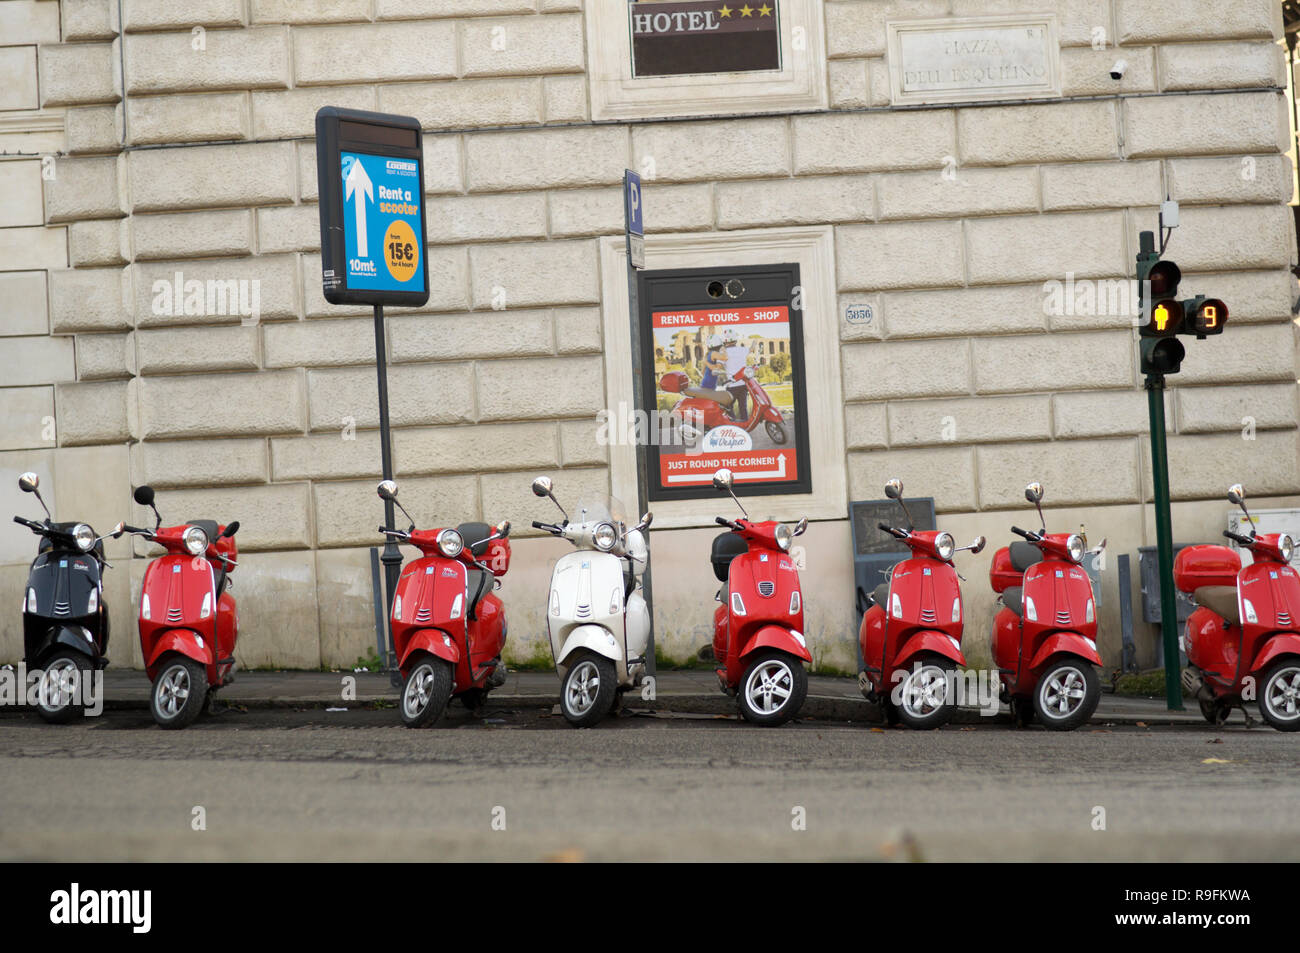 Vespa scooters for rent, parked outdoors, Rome, Lazio, Italy Stock Photo